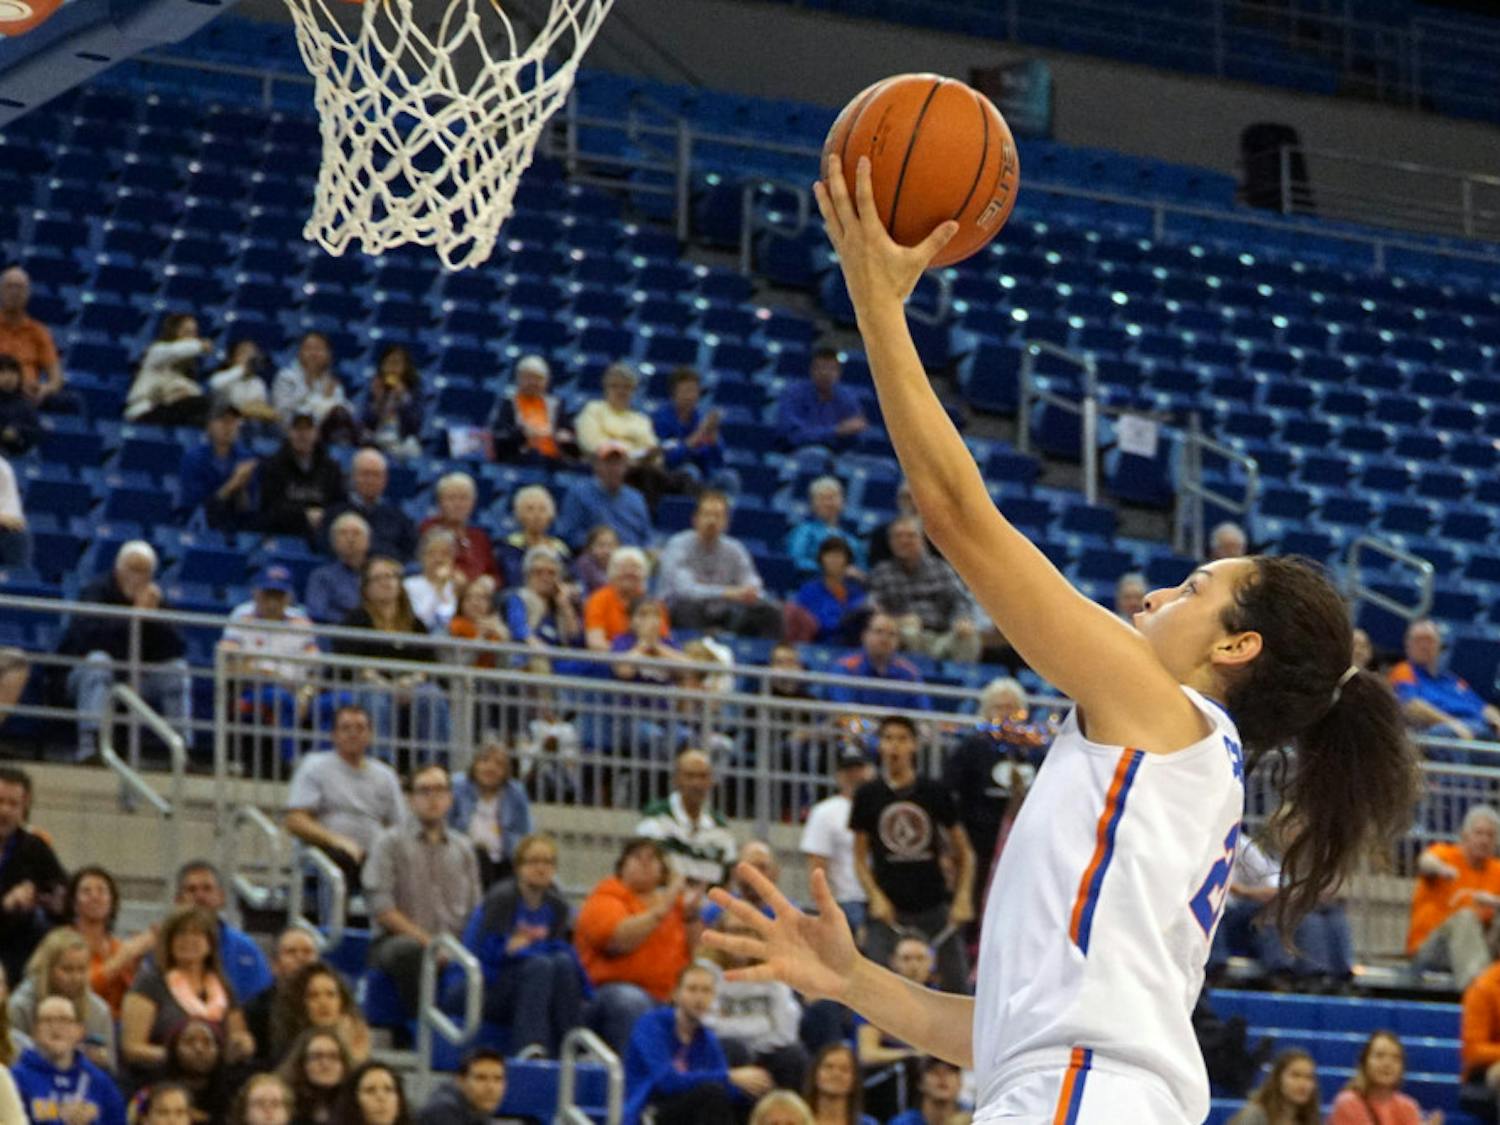 UF guard Eleanna Christinaki goes for a layup during Florida's 53-45 win against LSU on Jan. 17, 2016, in the O'Connell Center.